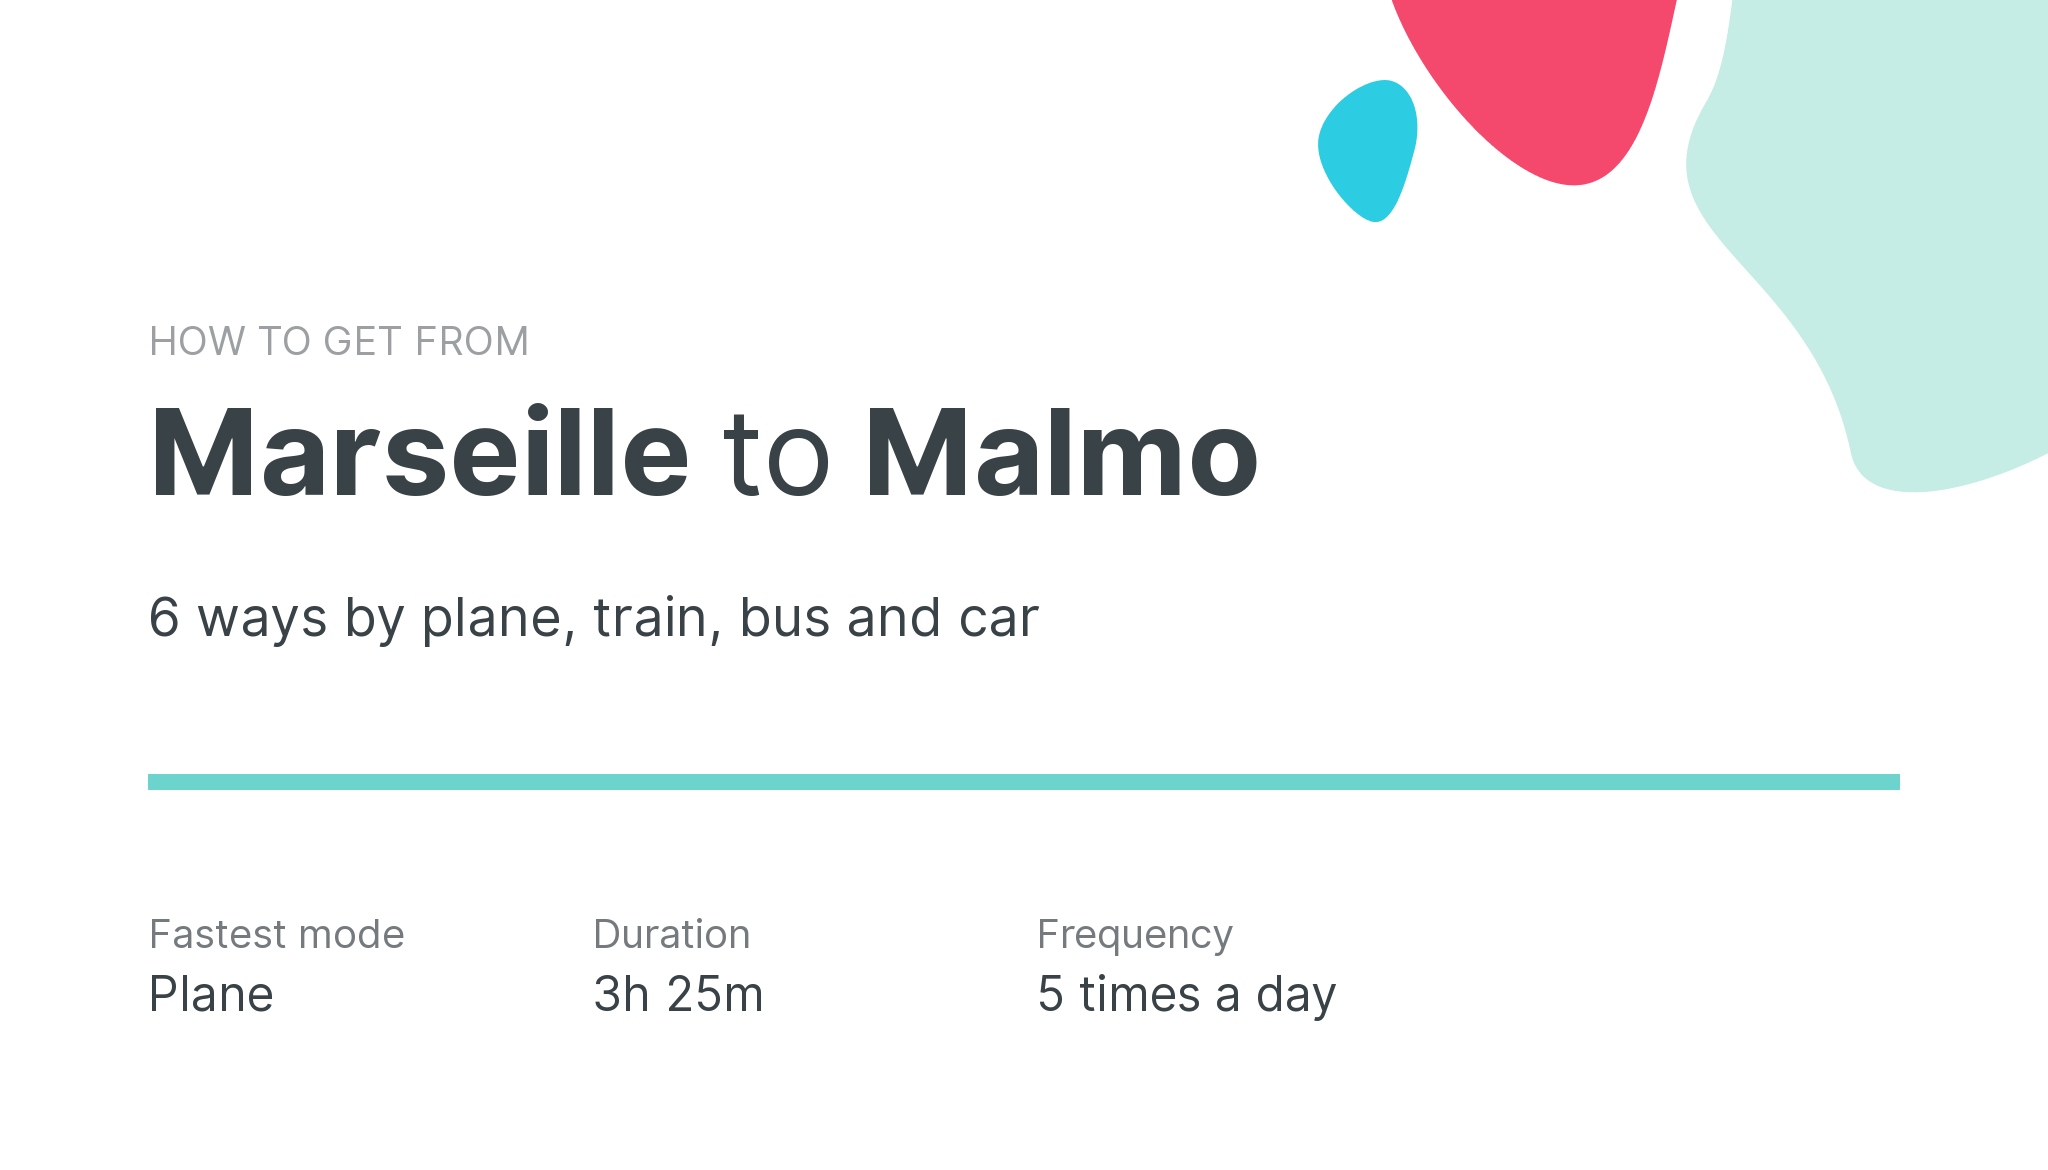 How do I get from Marseille to Malmo